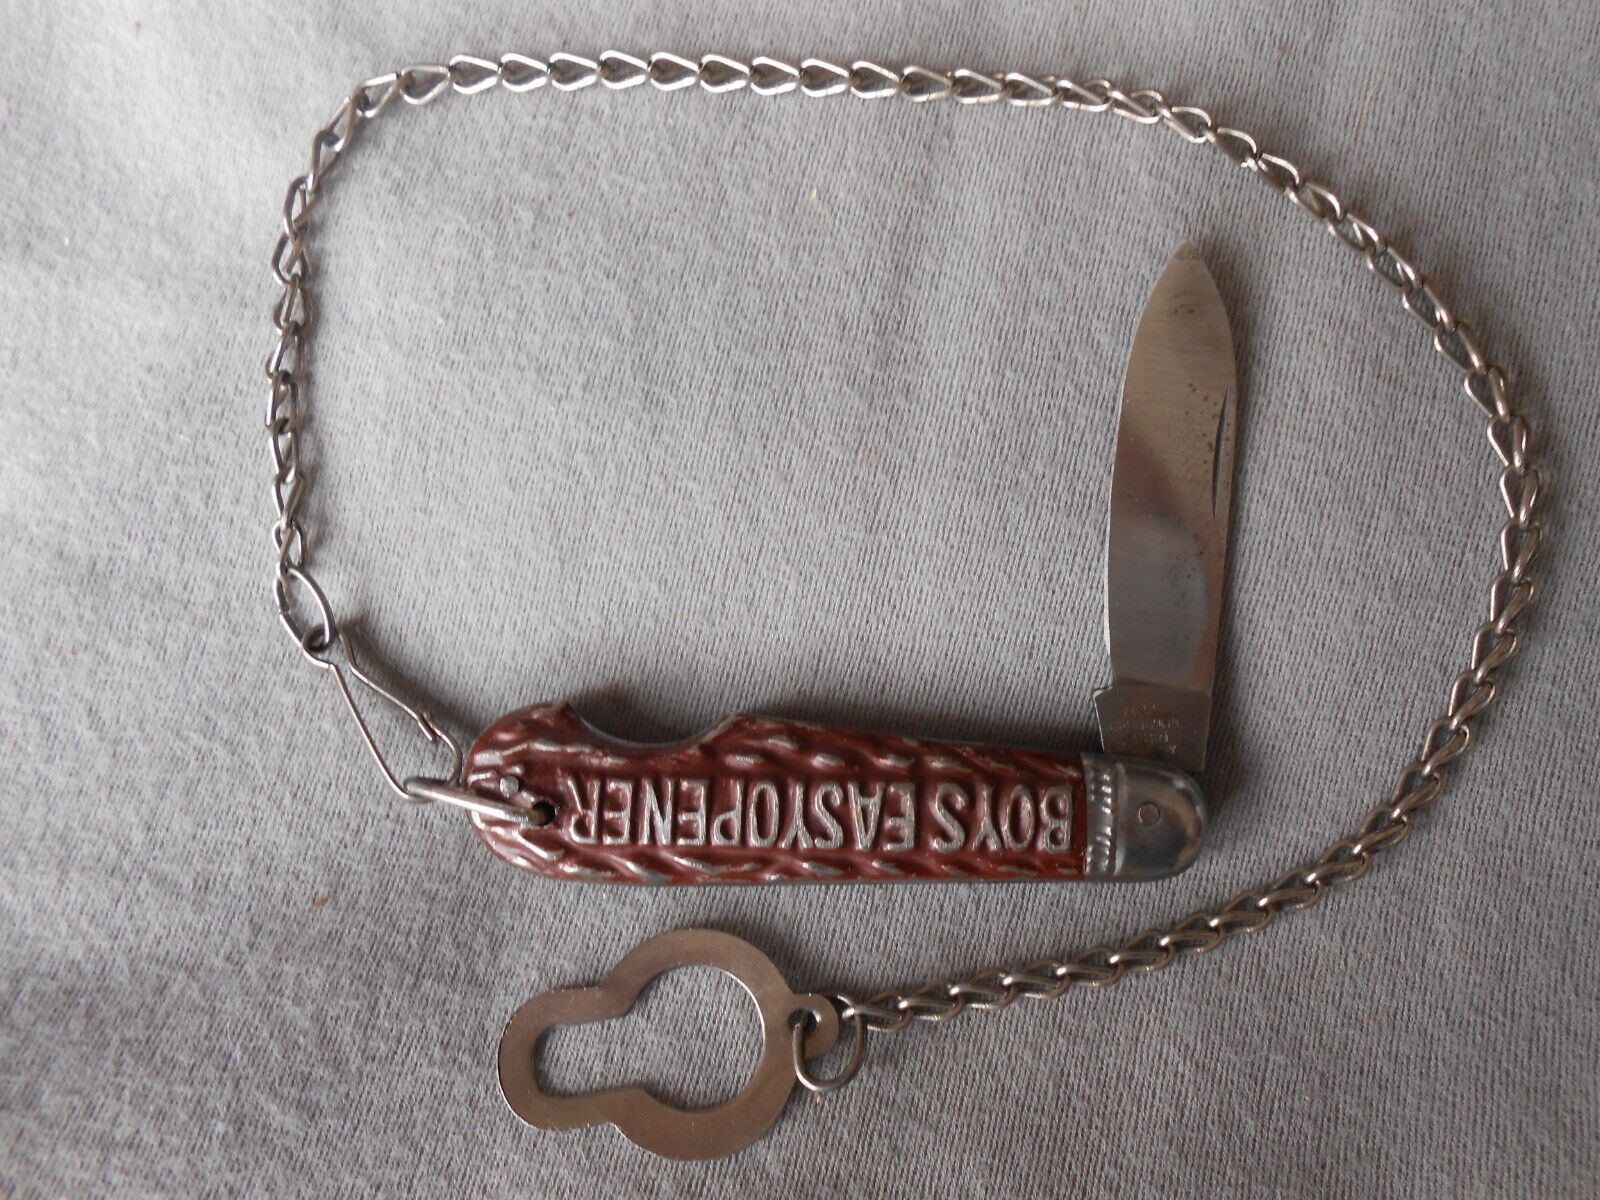 OLD VTG AW WADSWORTH & SON GERMANY BOYS EASY OPENER JACK KNIFE WITH ORIG CHAIN